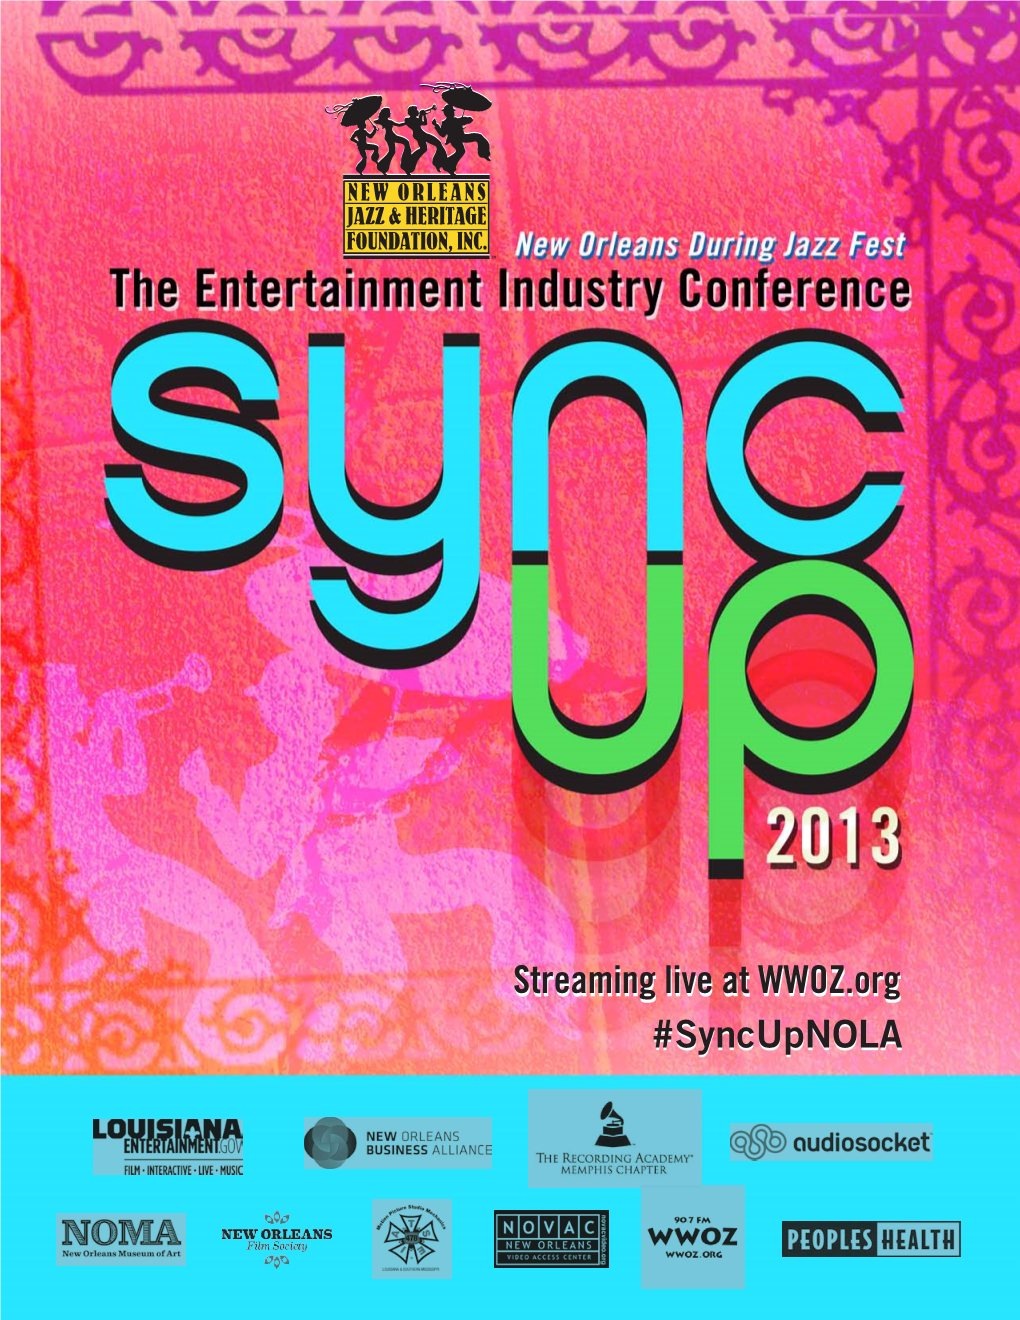 Streaming Live at WWOZ.Org #Syncupnola Welcome to the Sixth Annual Sync up Conference, an Economic Development Program of the New Orleans Jazz & Heritage Foundation